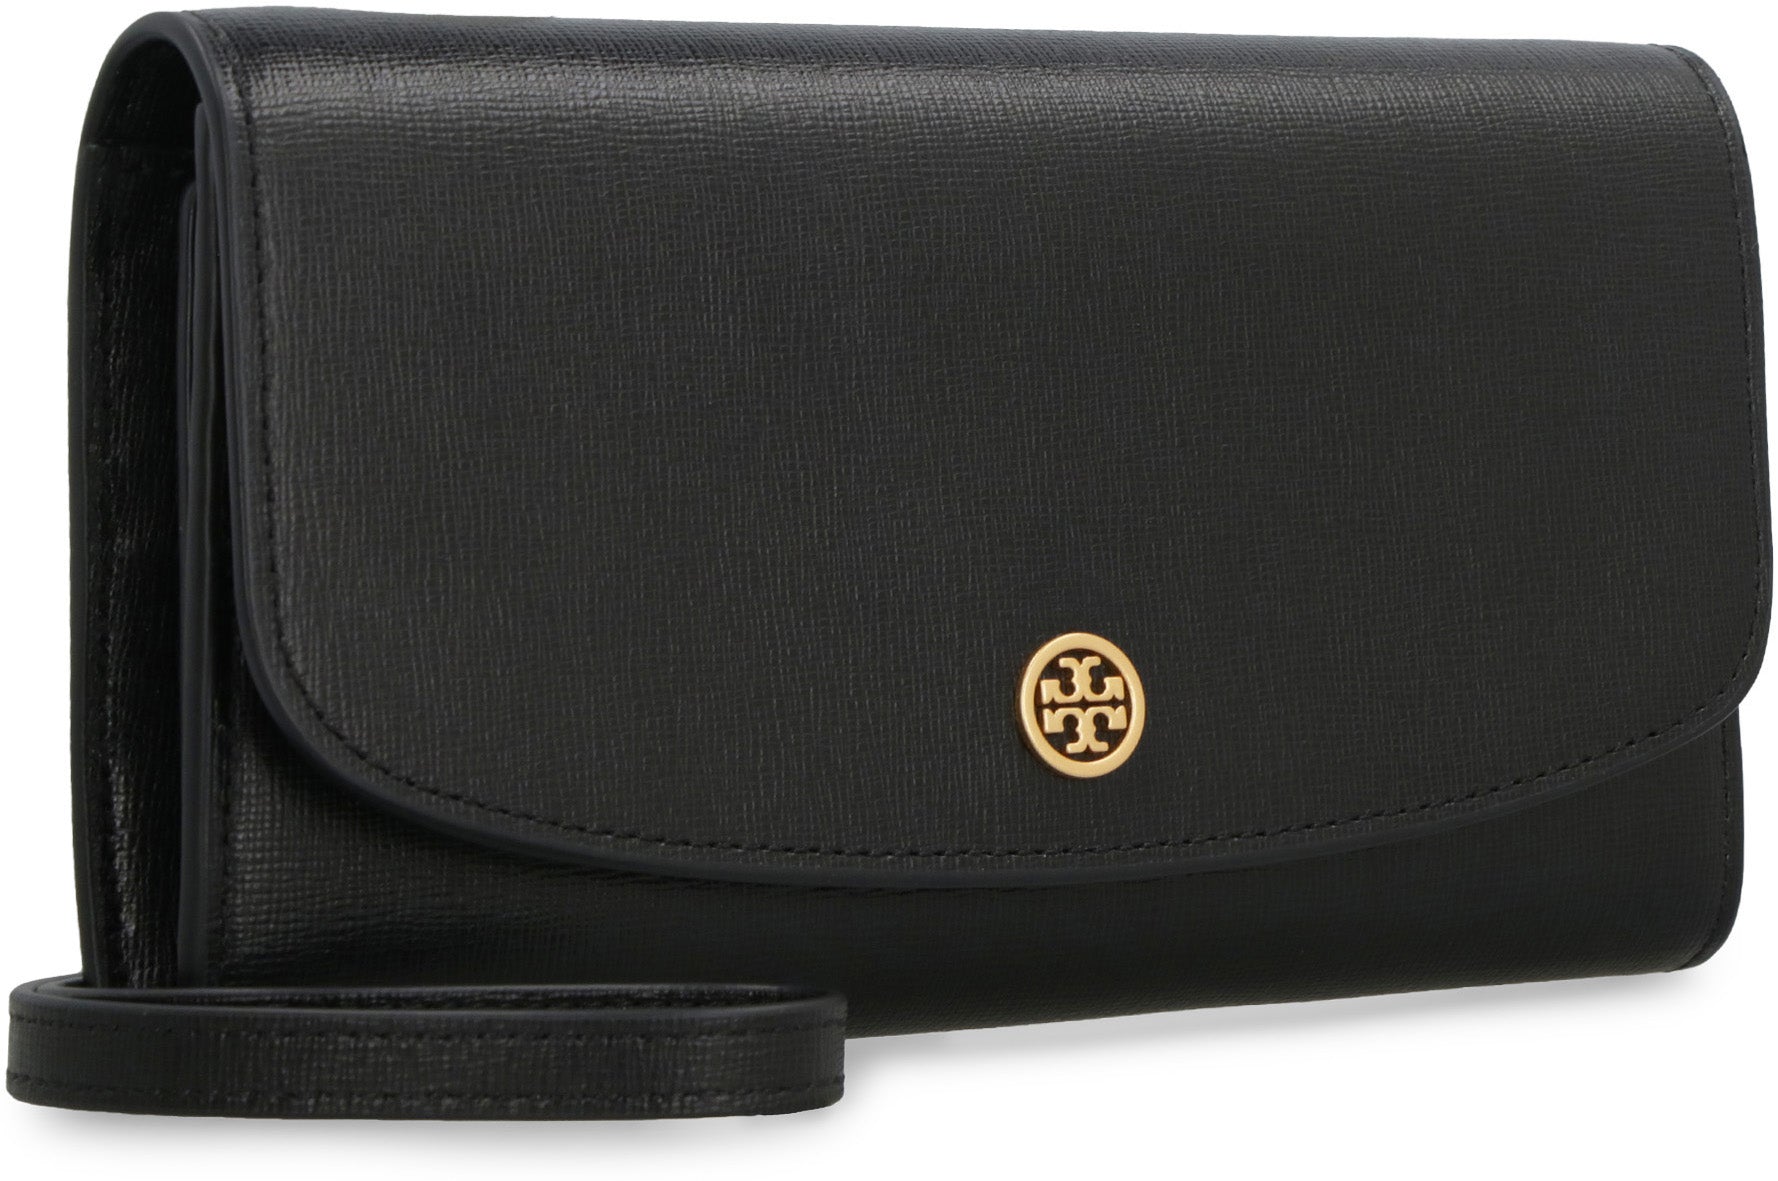 Tory Burch Light Blue Saffiano Leather Robinson Wallet On Chain Tory Burch